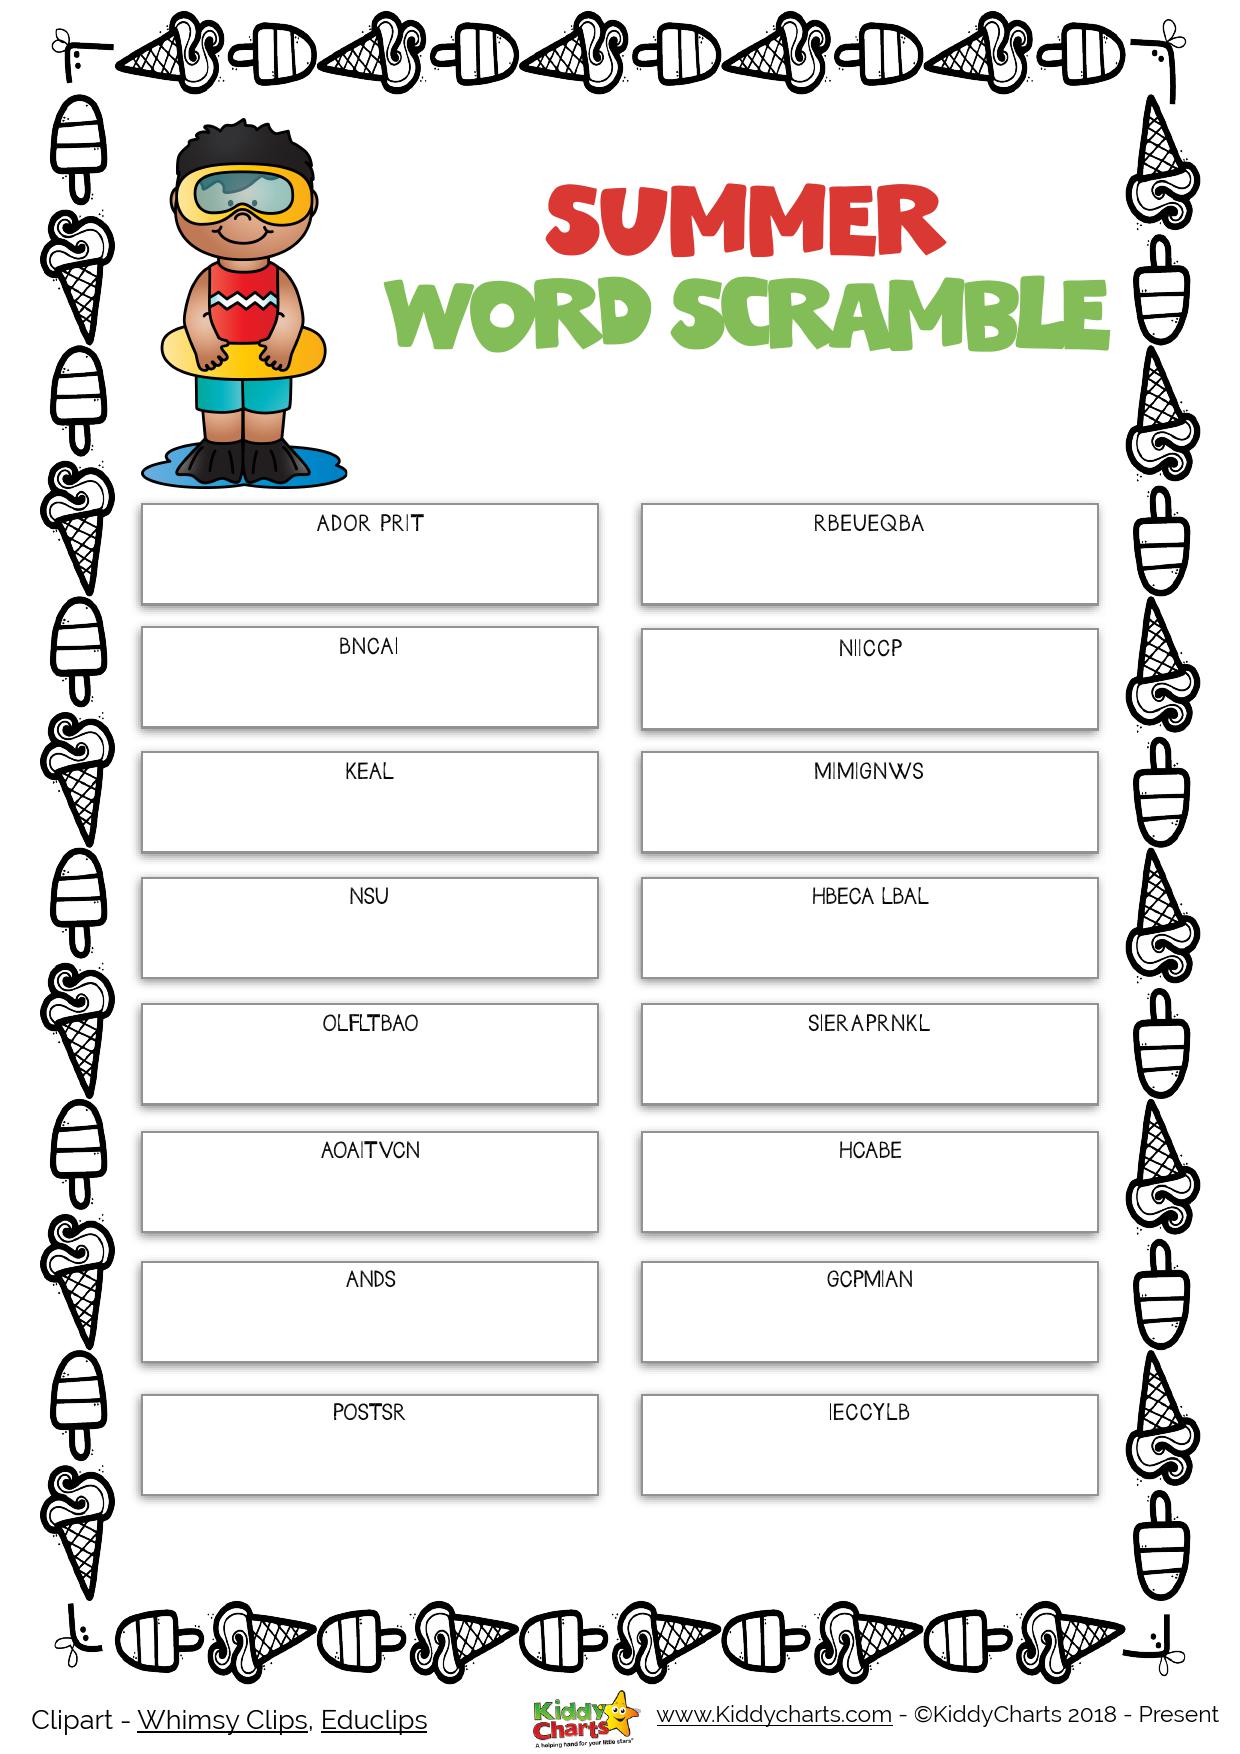 It is a summer word scramble for everyone today - why not check this out alongside all the other summer activities we have on the site for the kids? #summer #kids #activities #printables